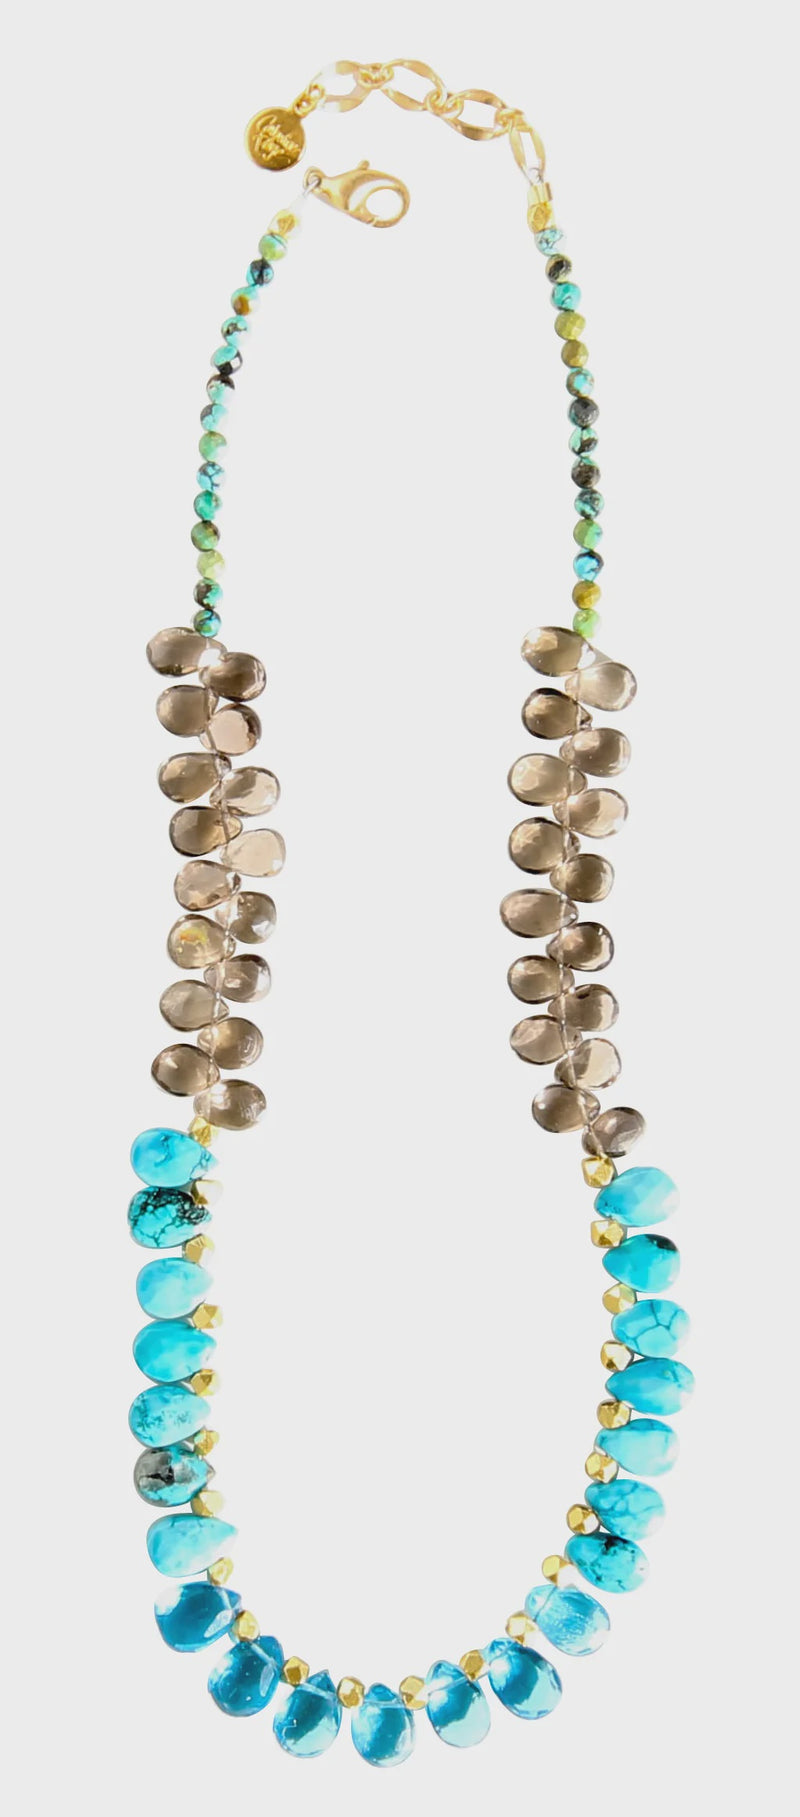 Terrain Gem Necklace - Turquoise with Topaz